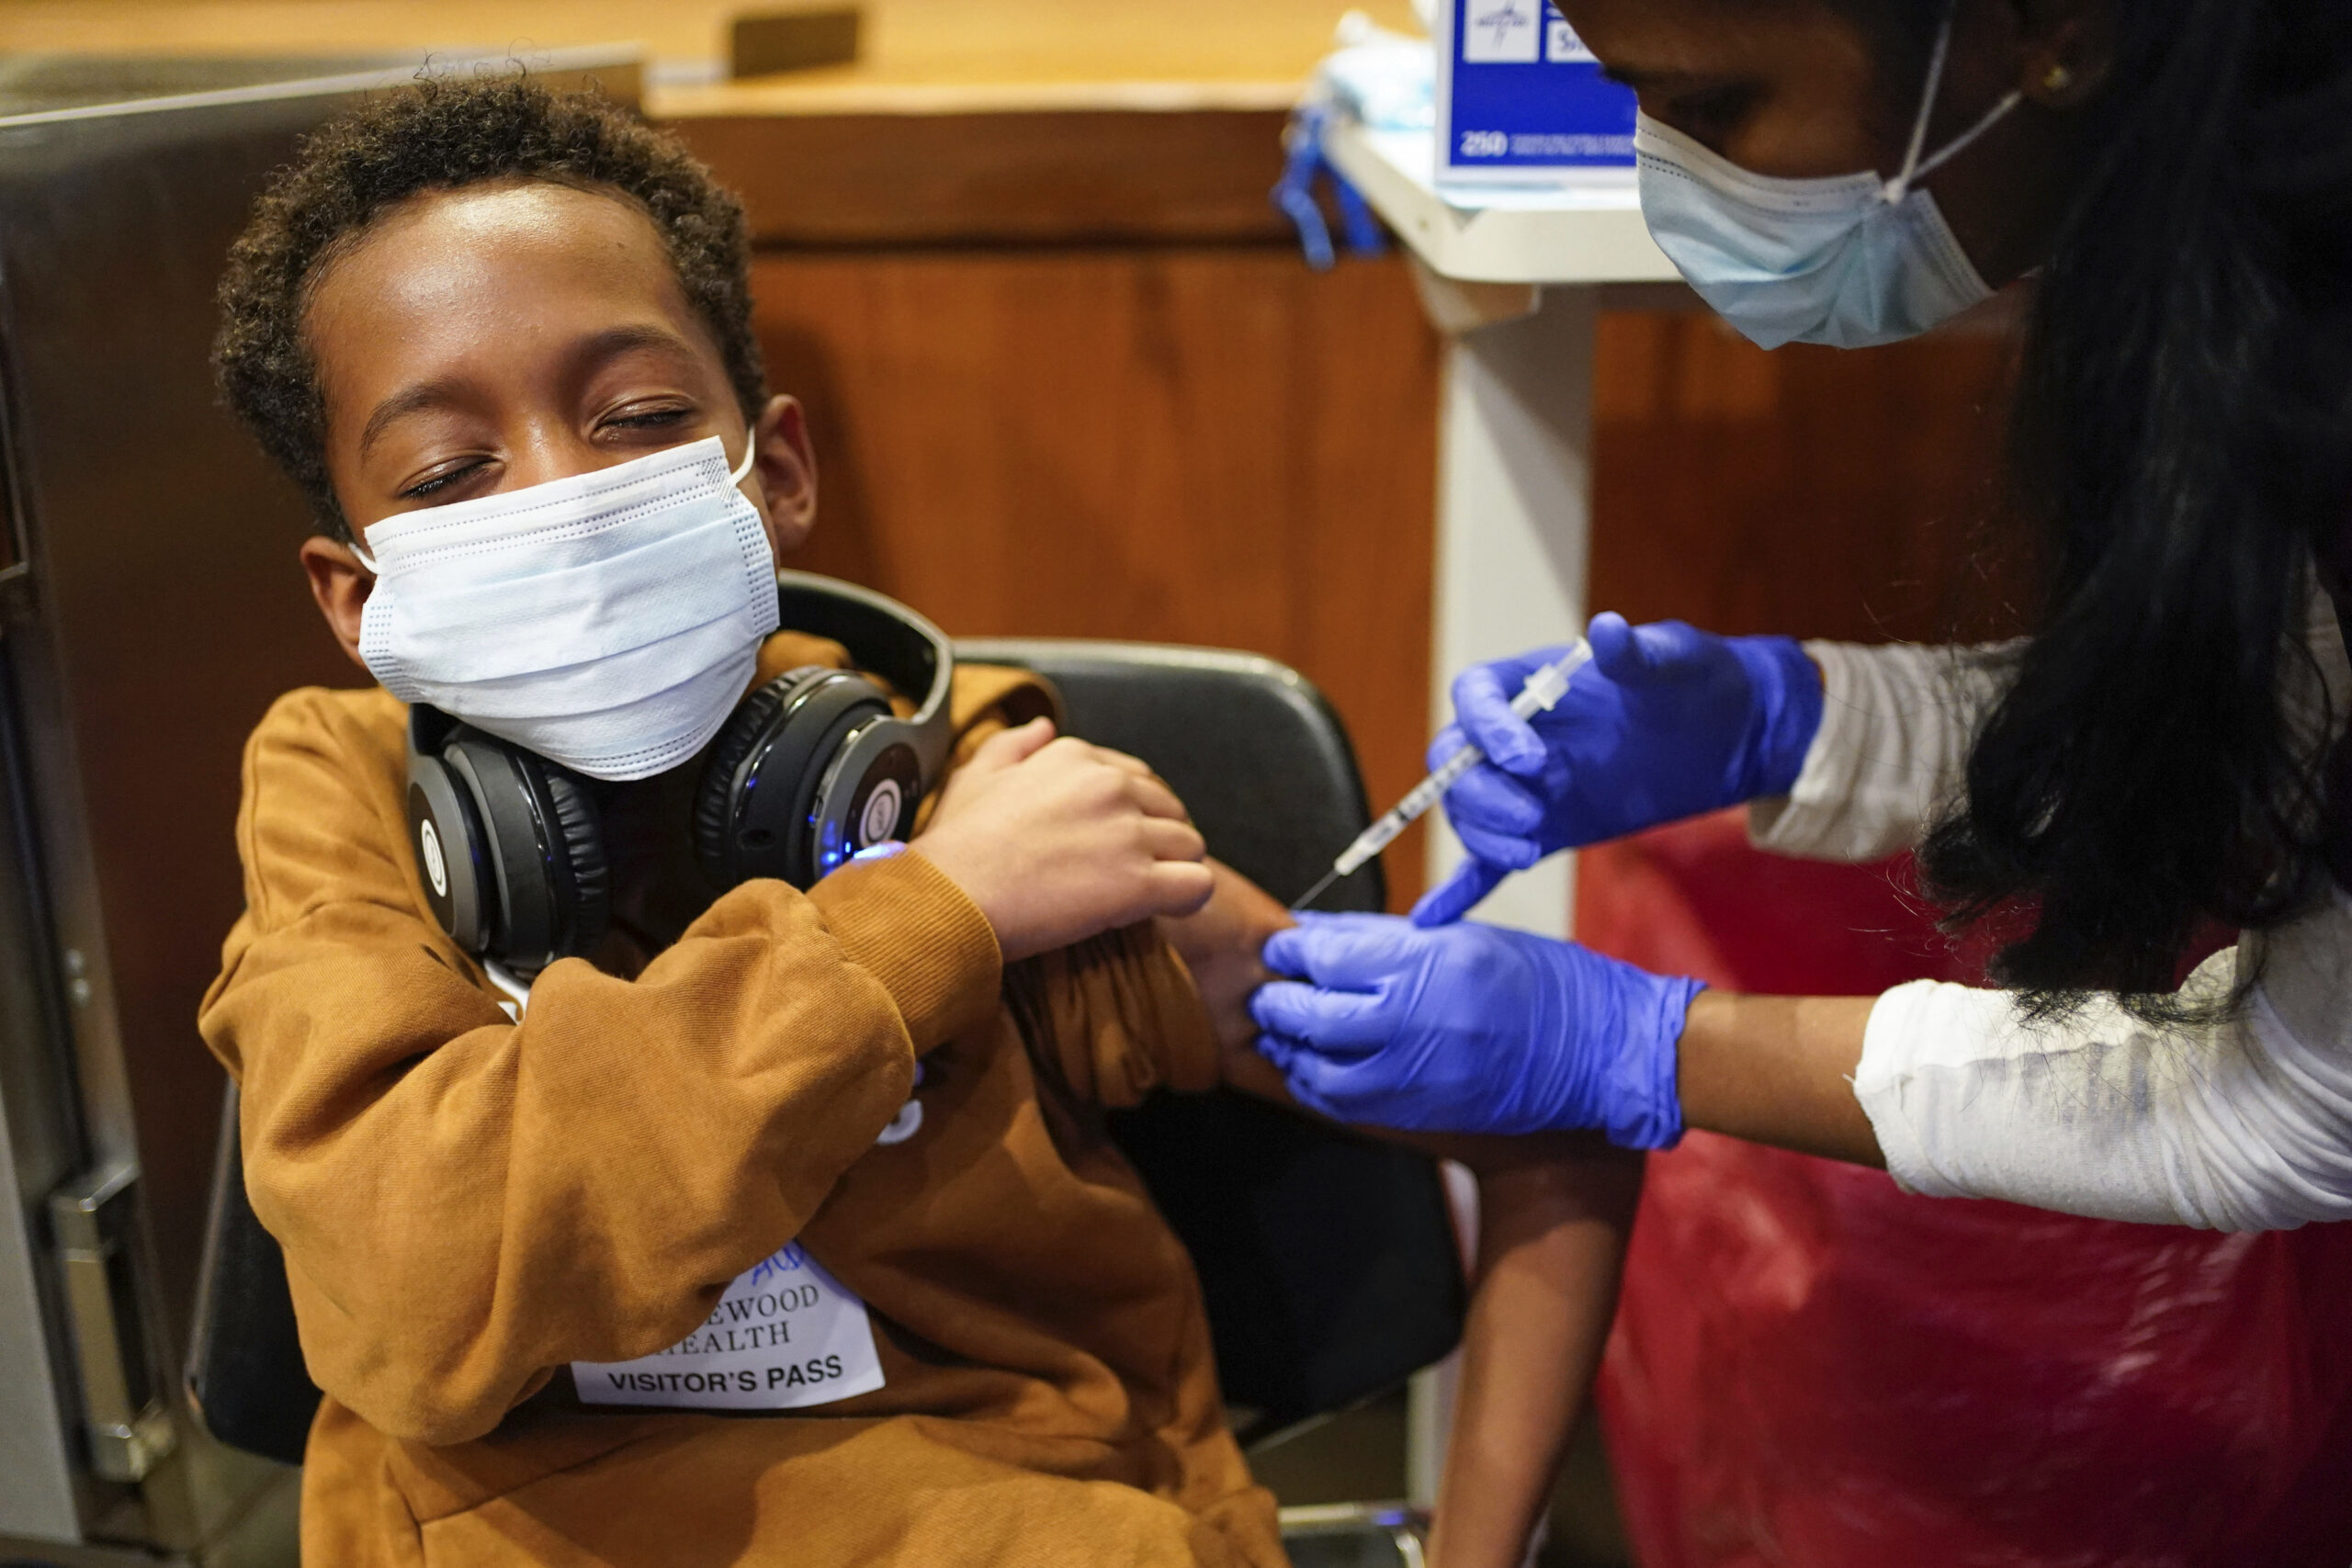 Cameron West, 9, receives a COVID-19 vaccination